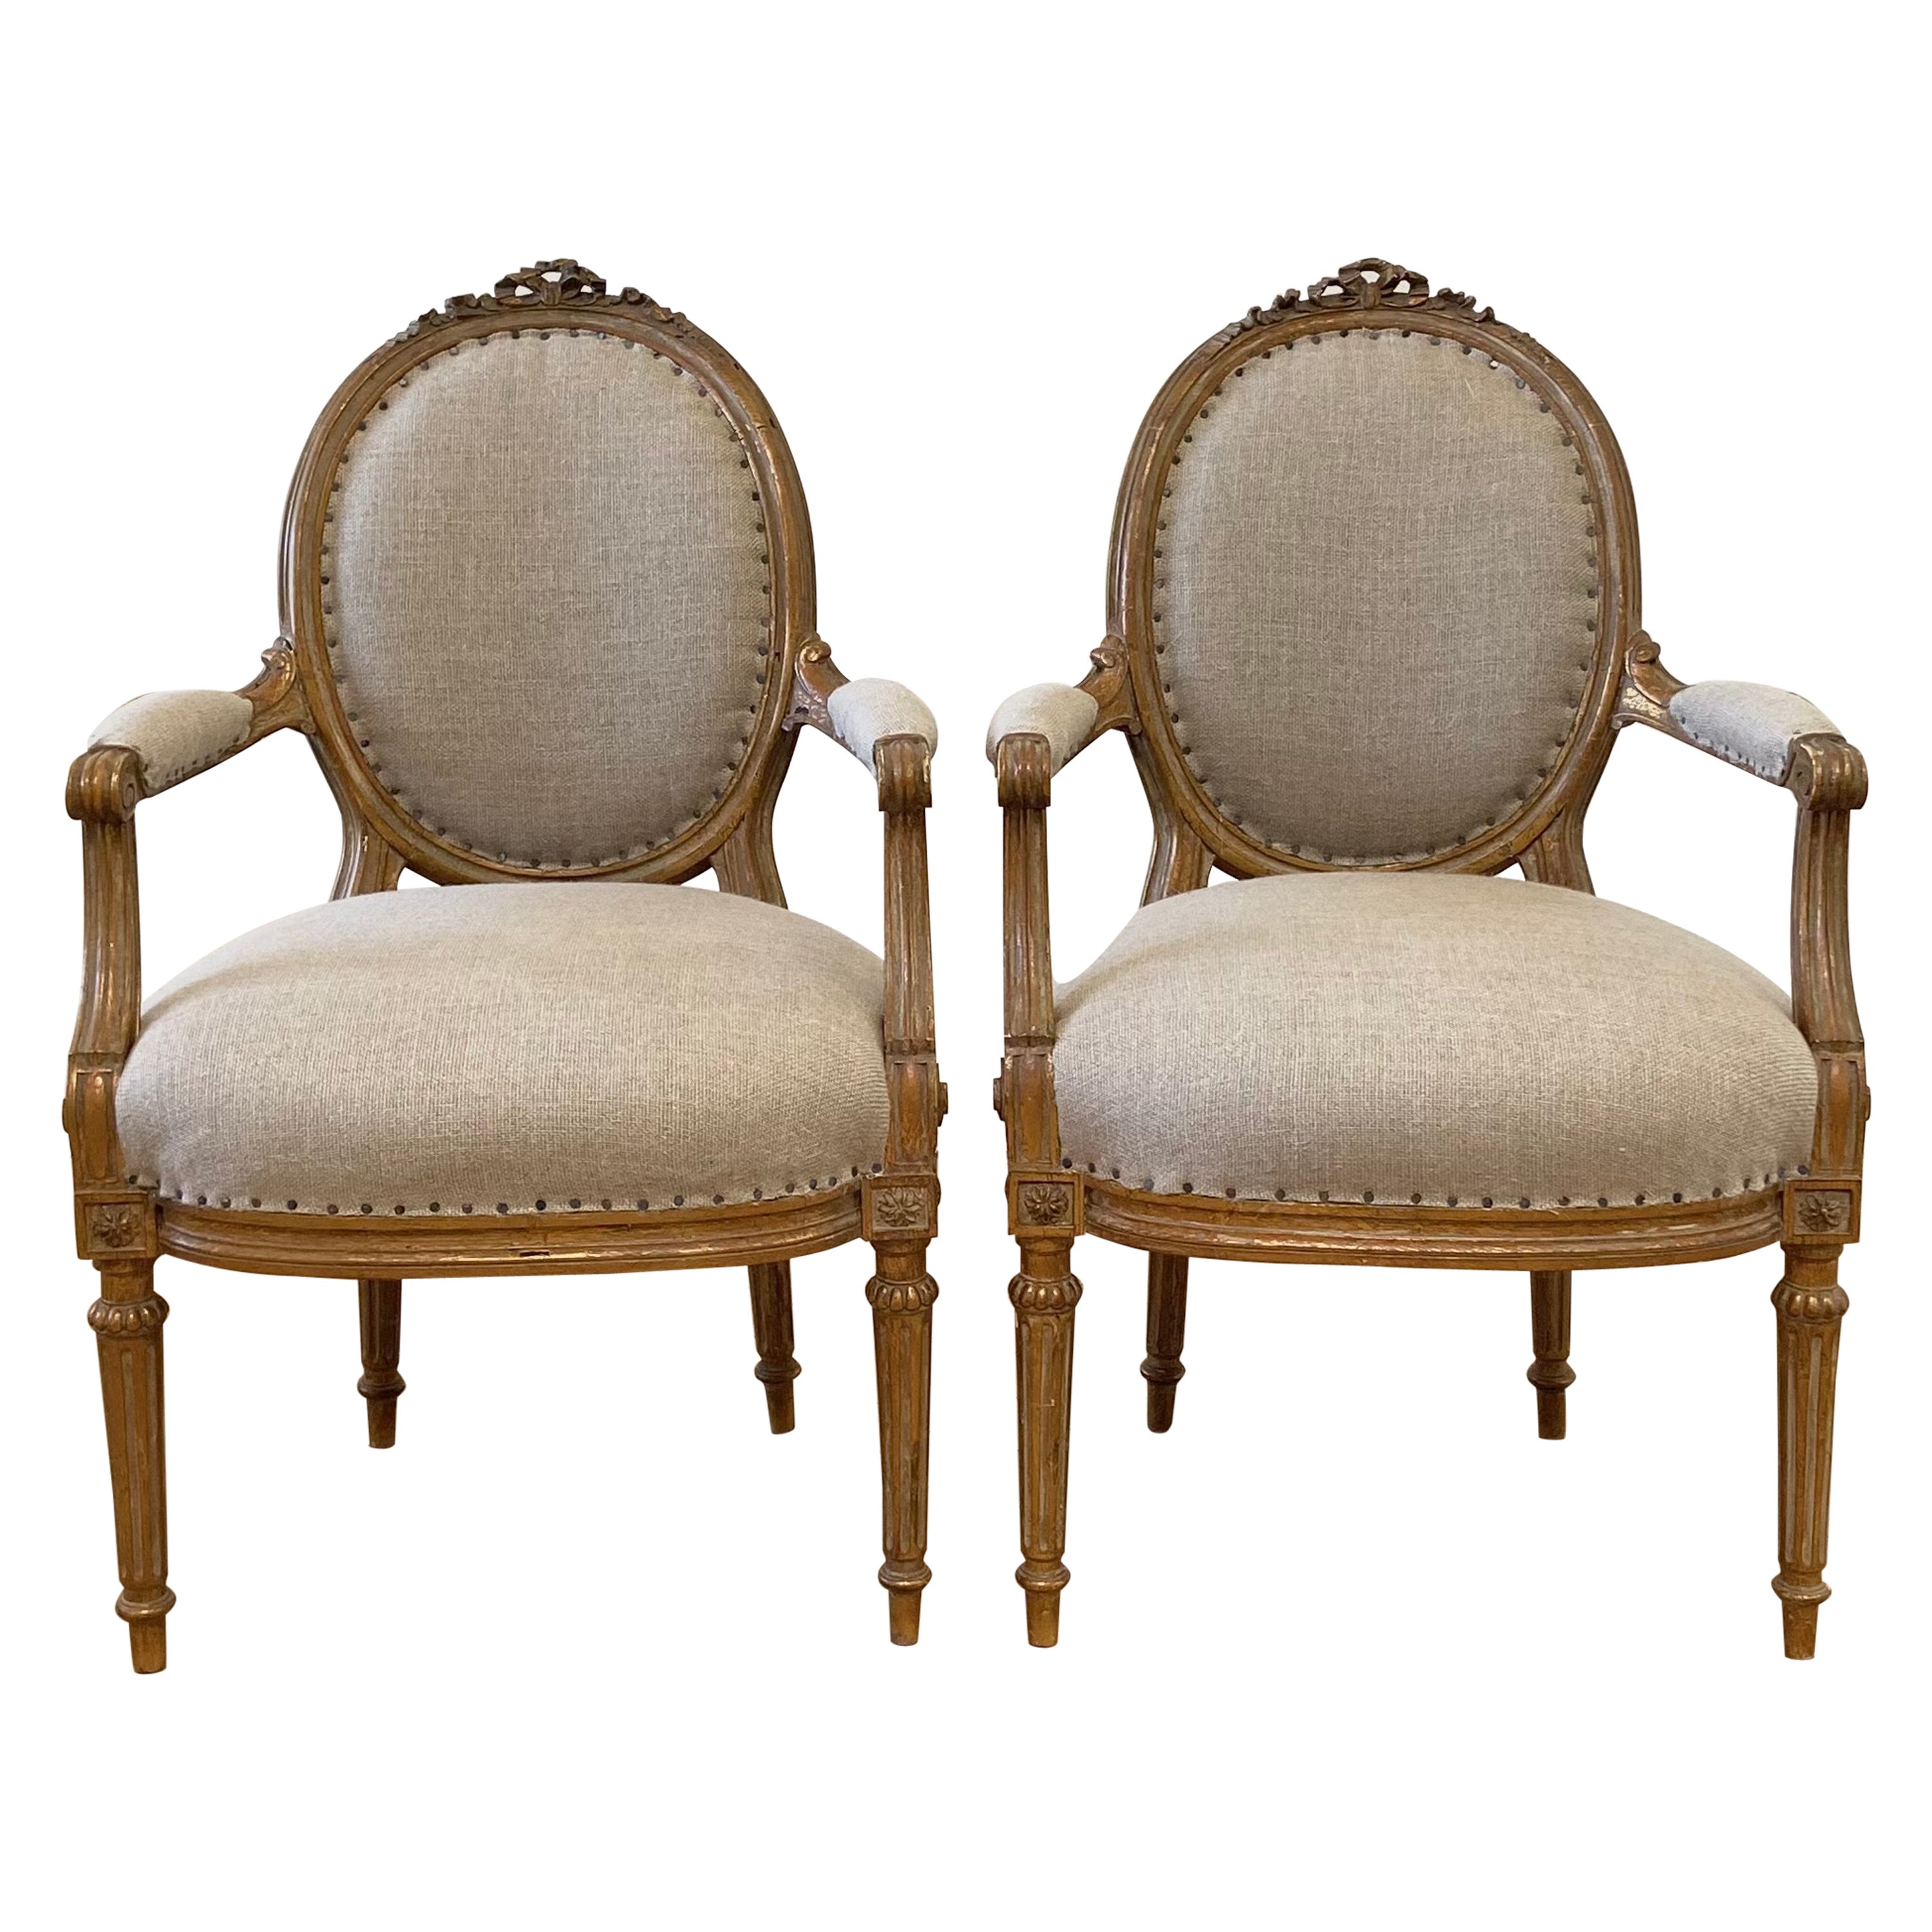 Antique Pair of Gilt Wood Open Arm Chairs Upholstered in Natural Linen For Sale